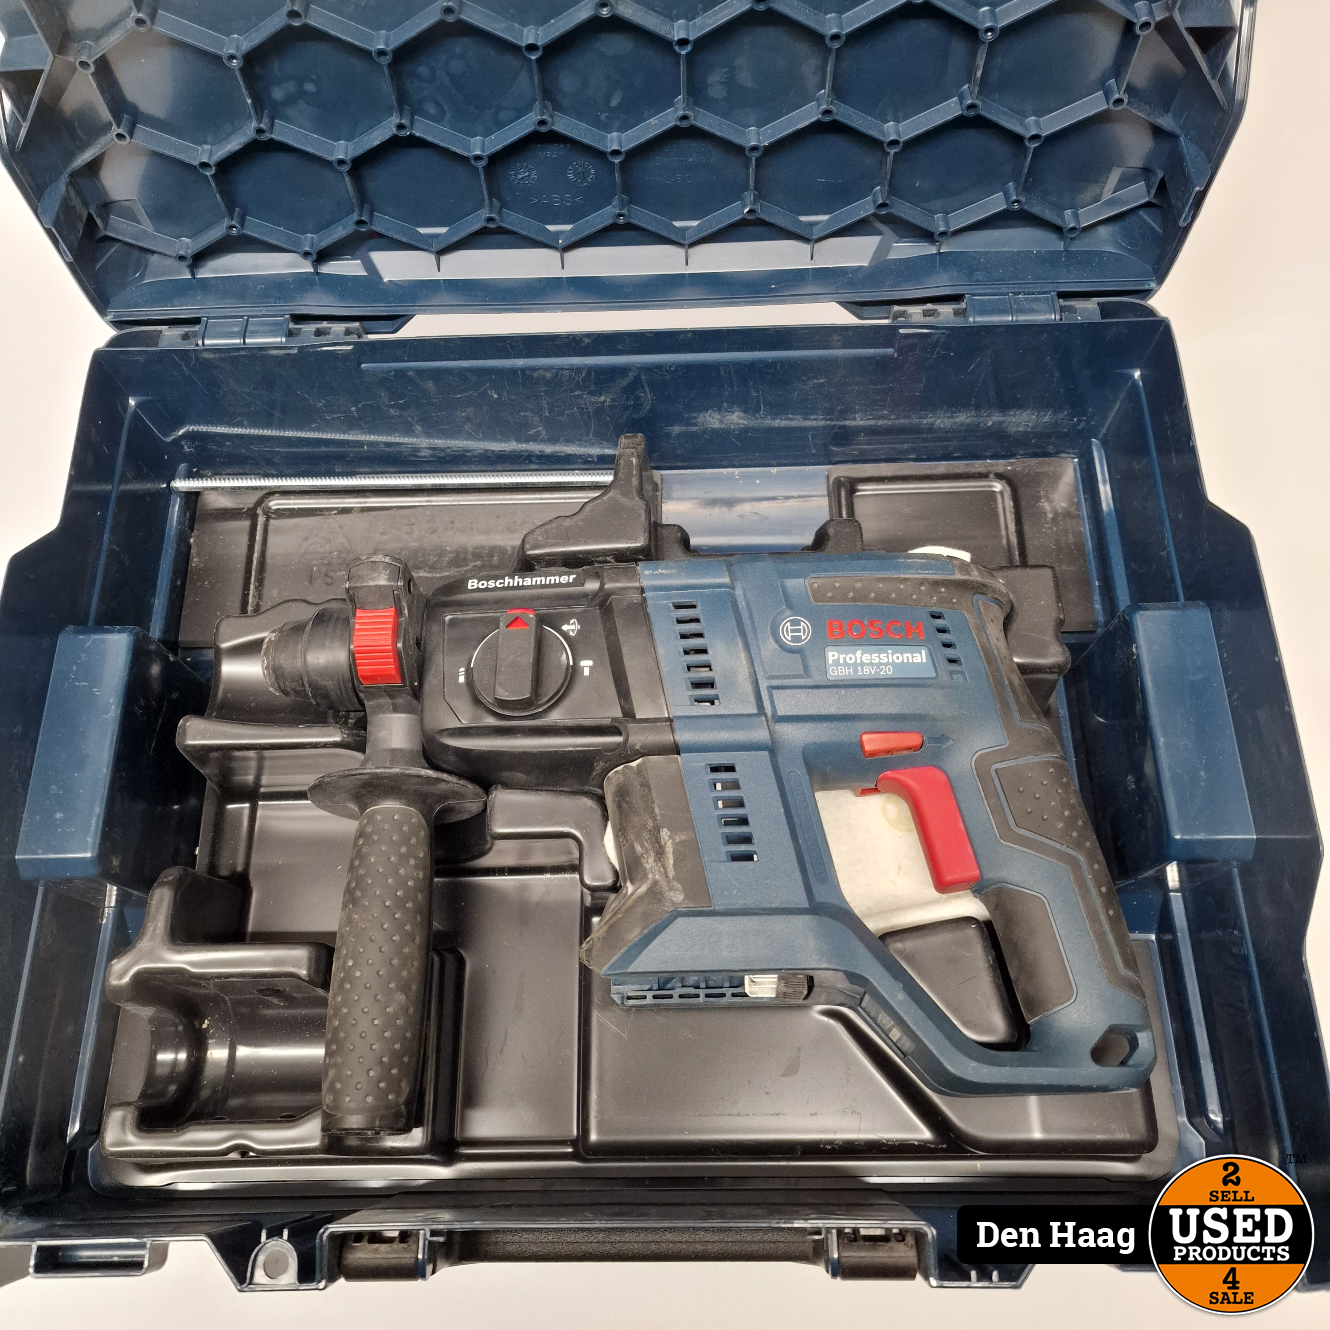 Bosch Professional GBH V-20 Accu Boorhamer Inc L-boxx Nette staat - Used Products Den Haag